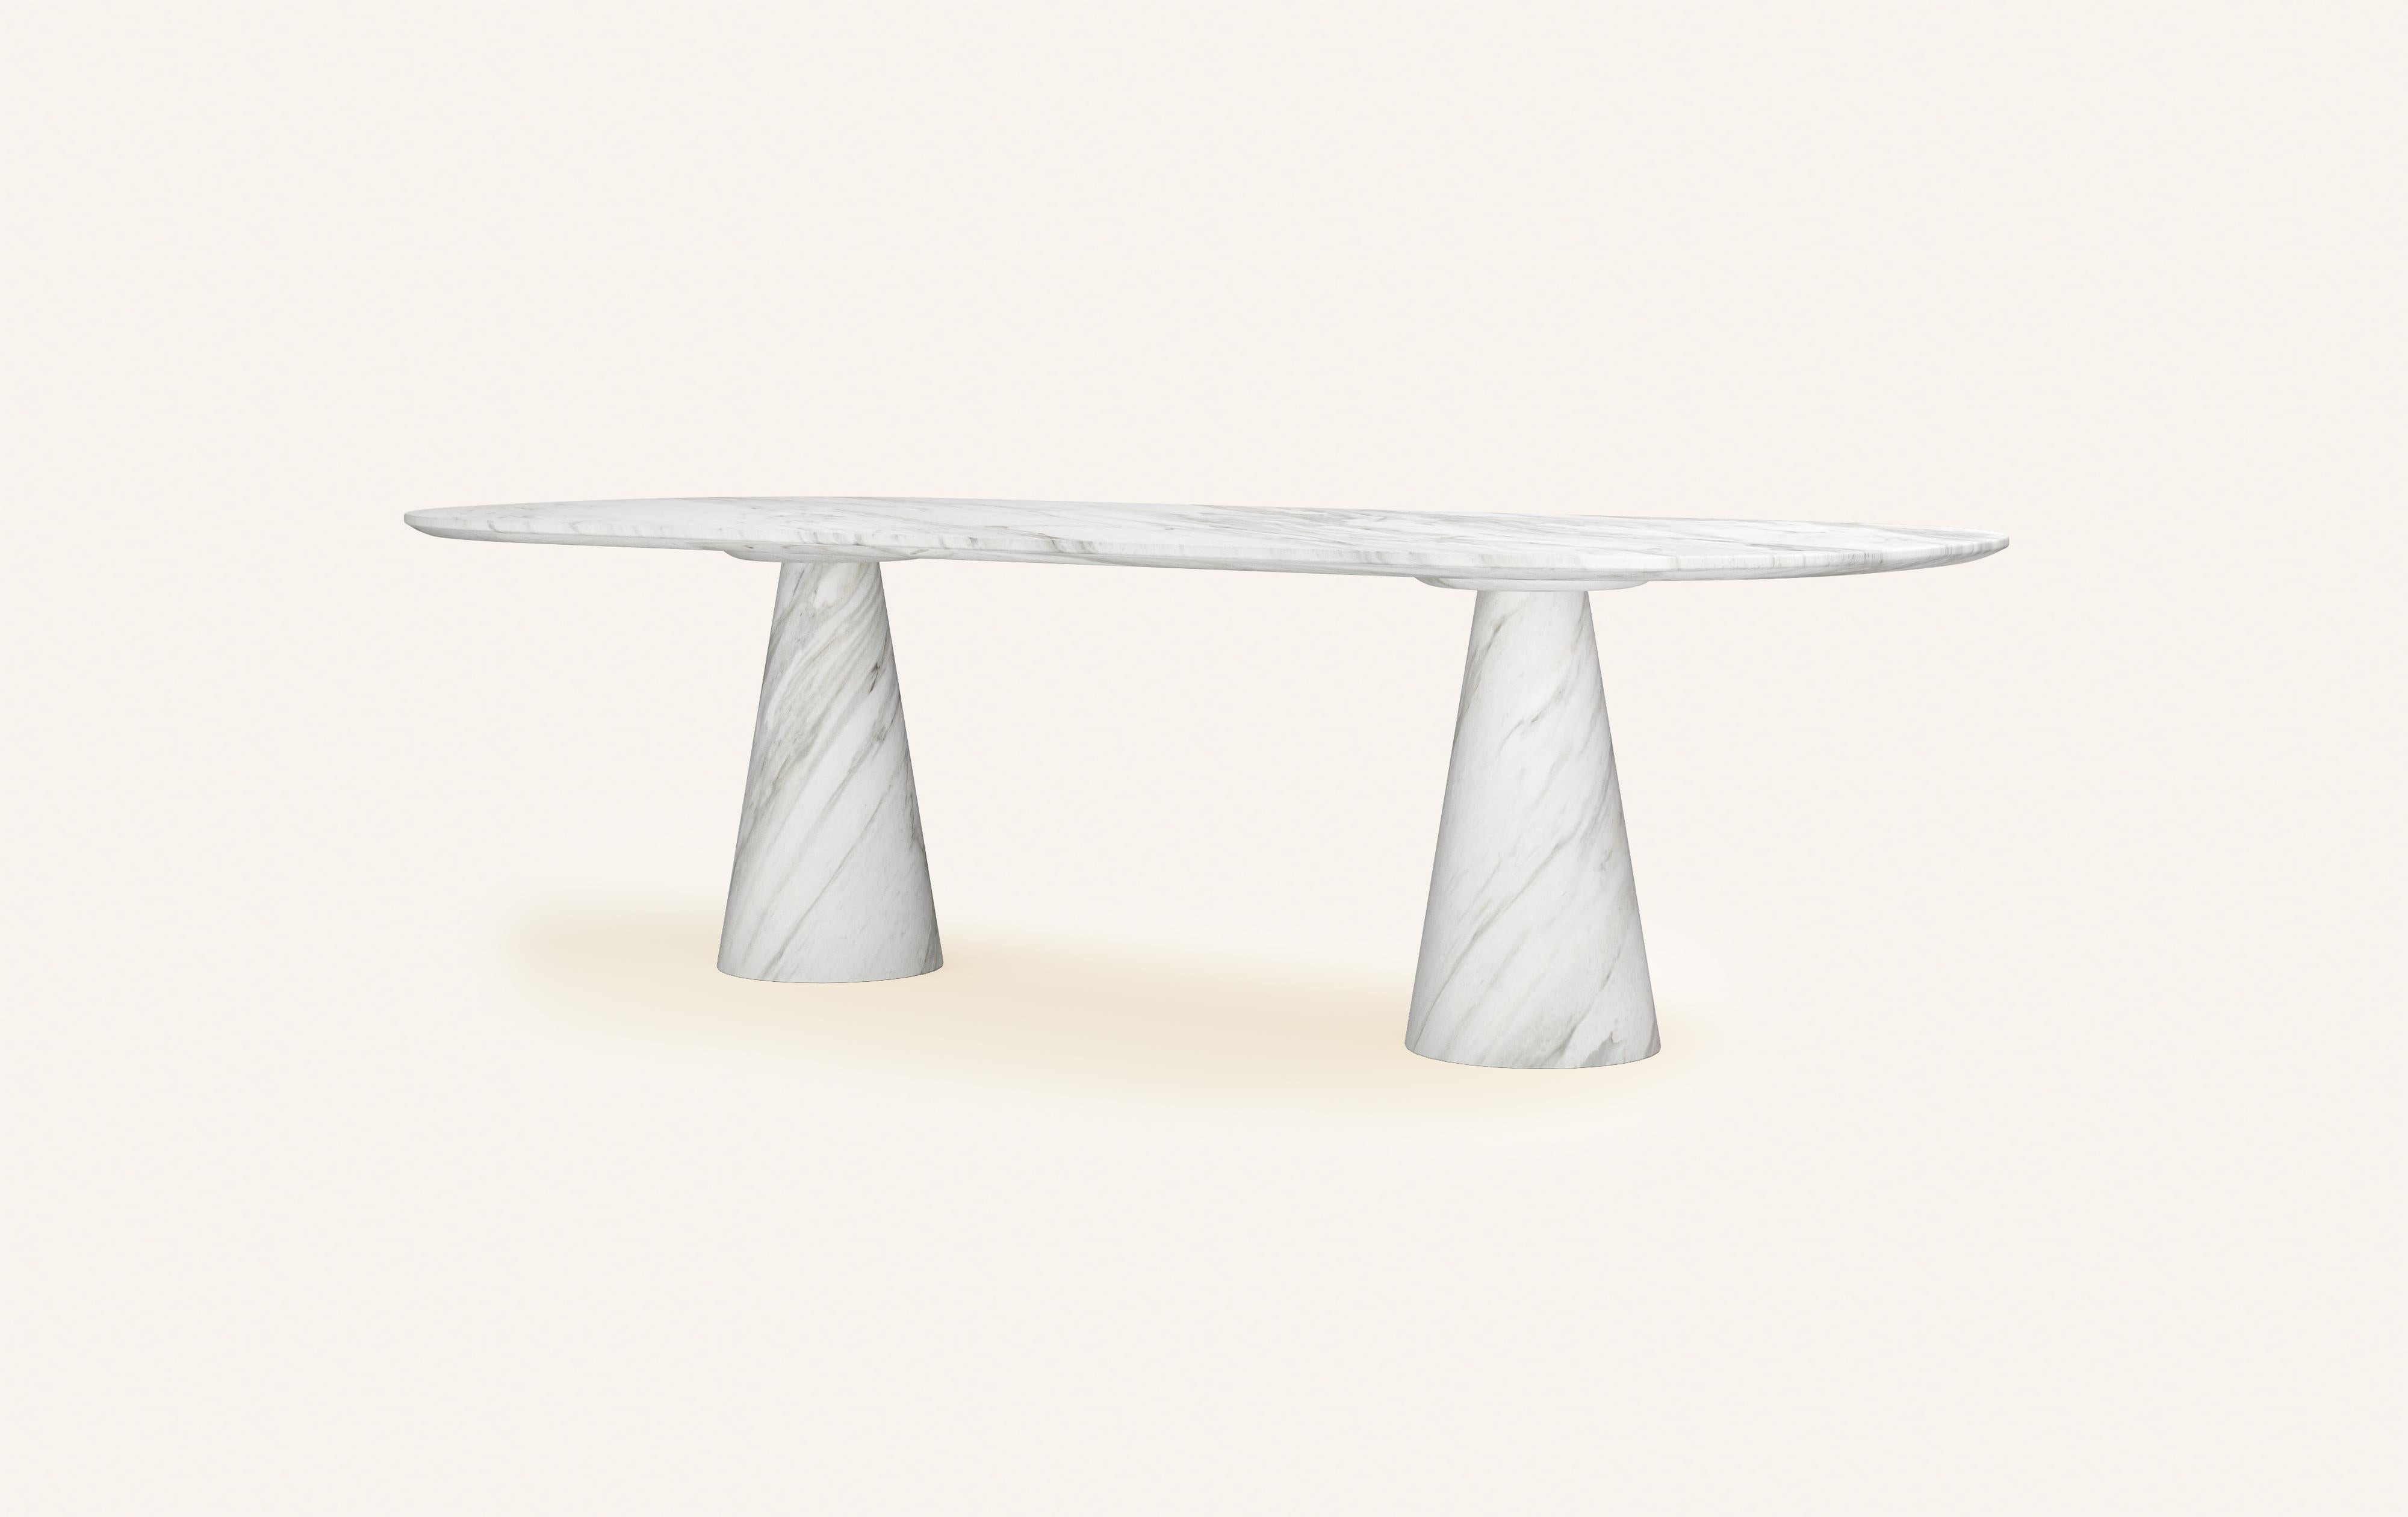 Organic Modern FORM(LA) Cono Oval Dining Table 118”L x 48”W x 30”H Volakas White Marble For Sale